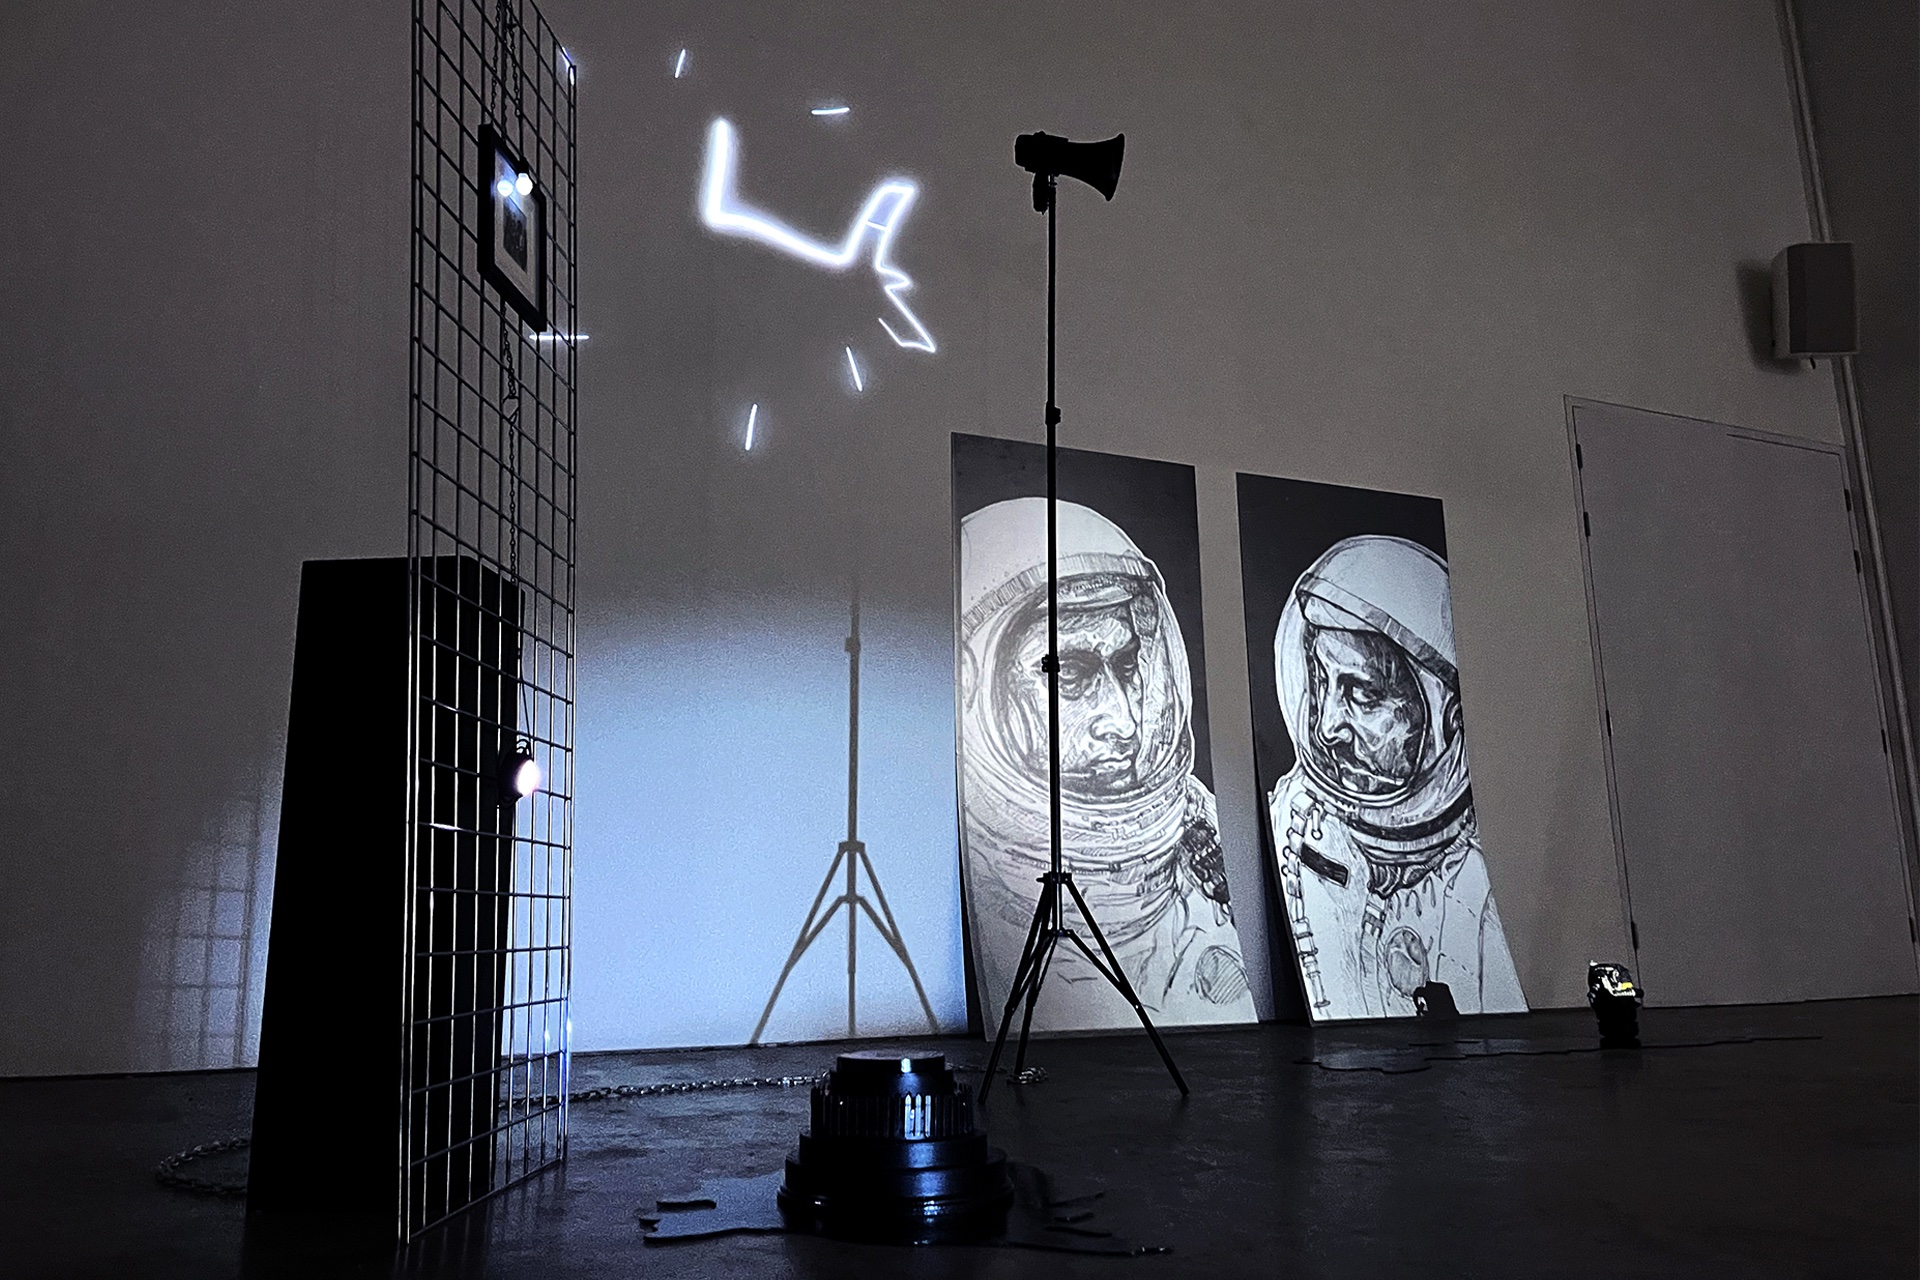 An installation in a dark room featuring a light projection of astronaut drawings.